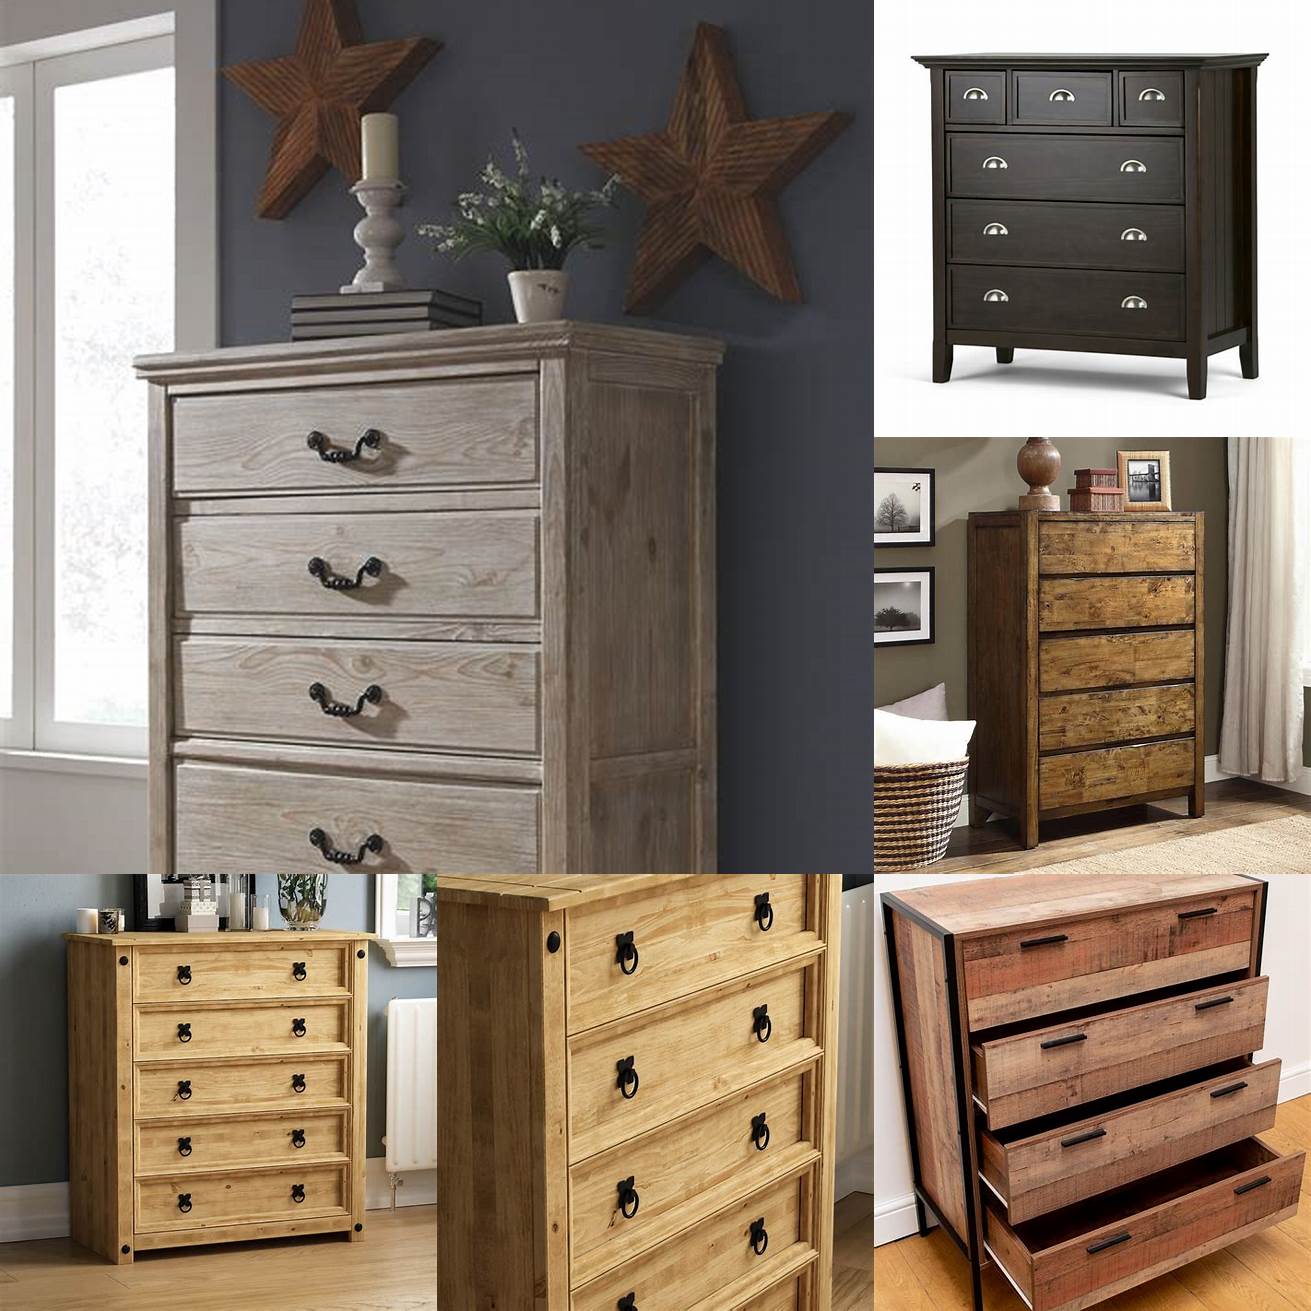 This rustic bedroom chest adds a touch of warmth and charm to any space